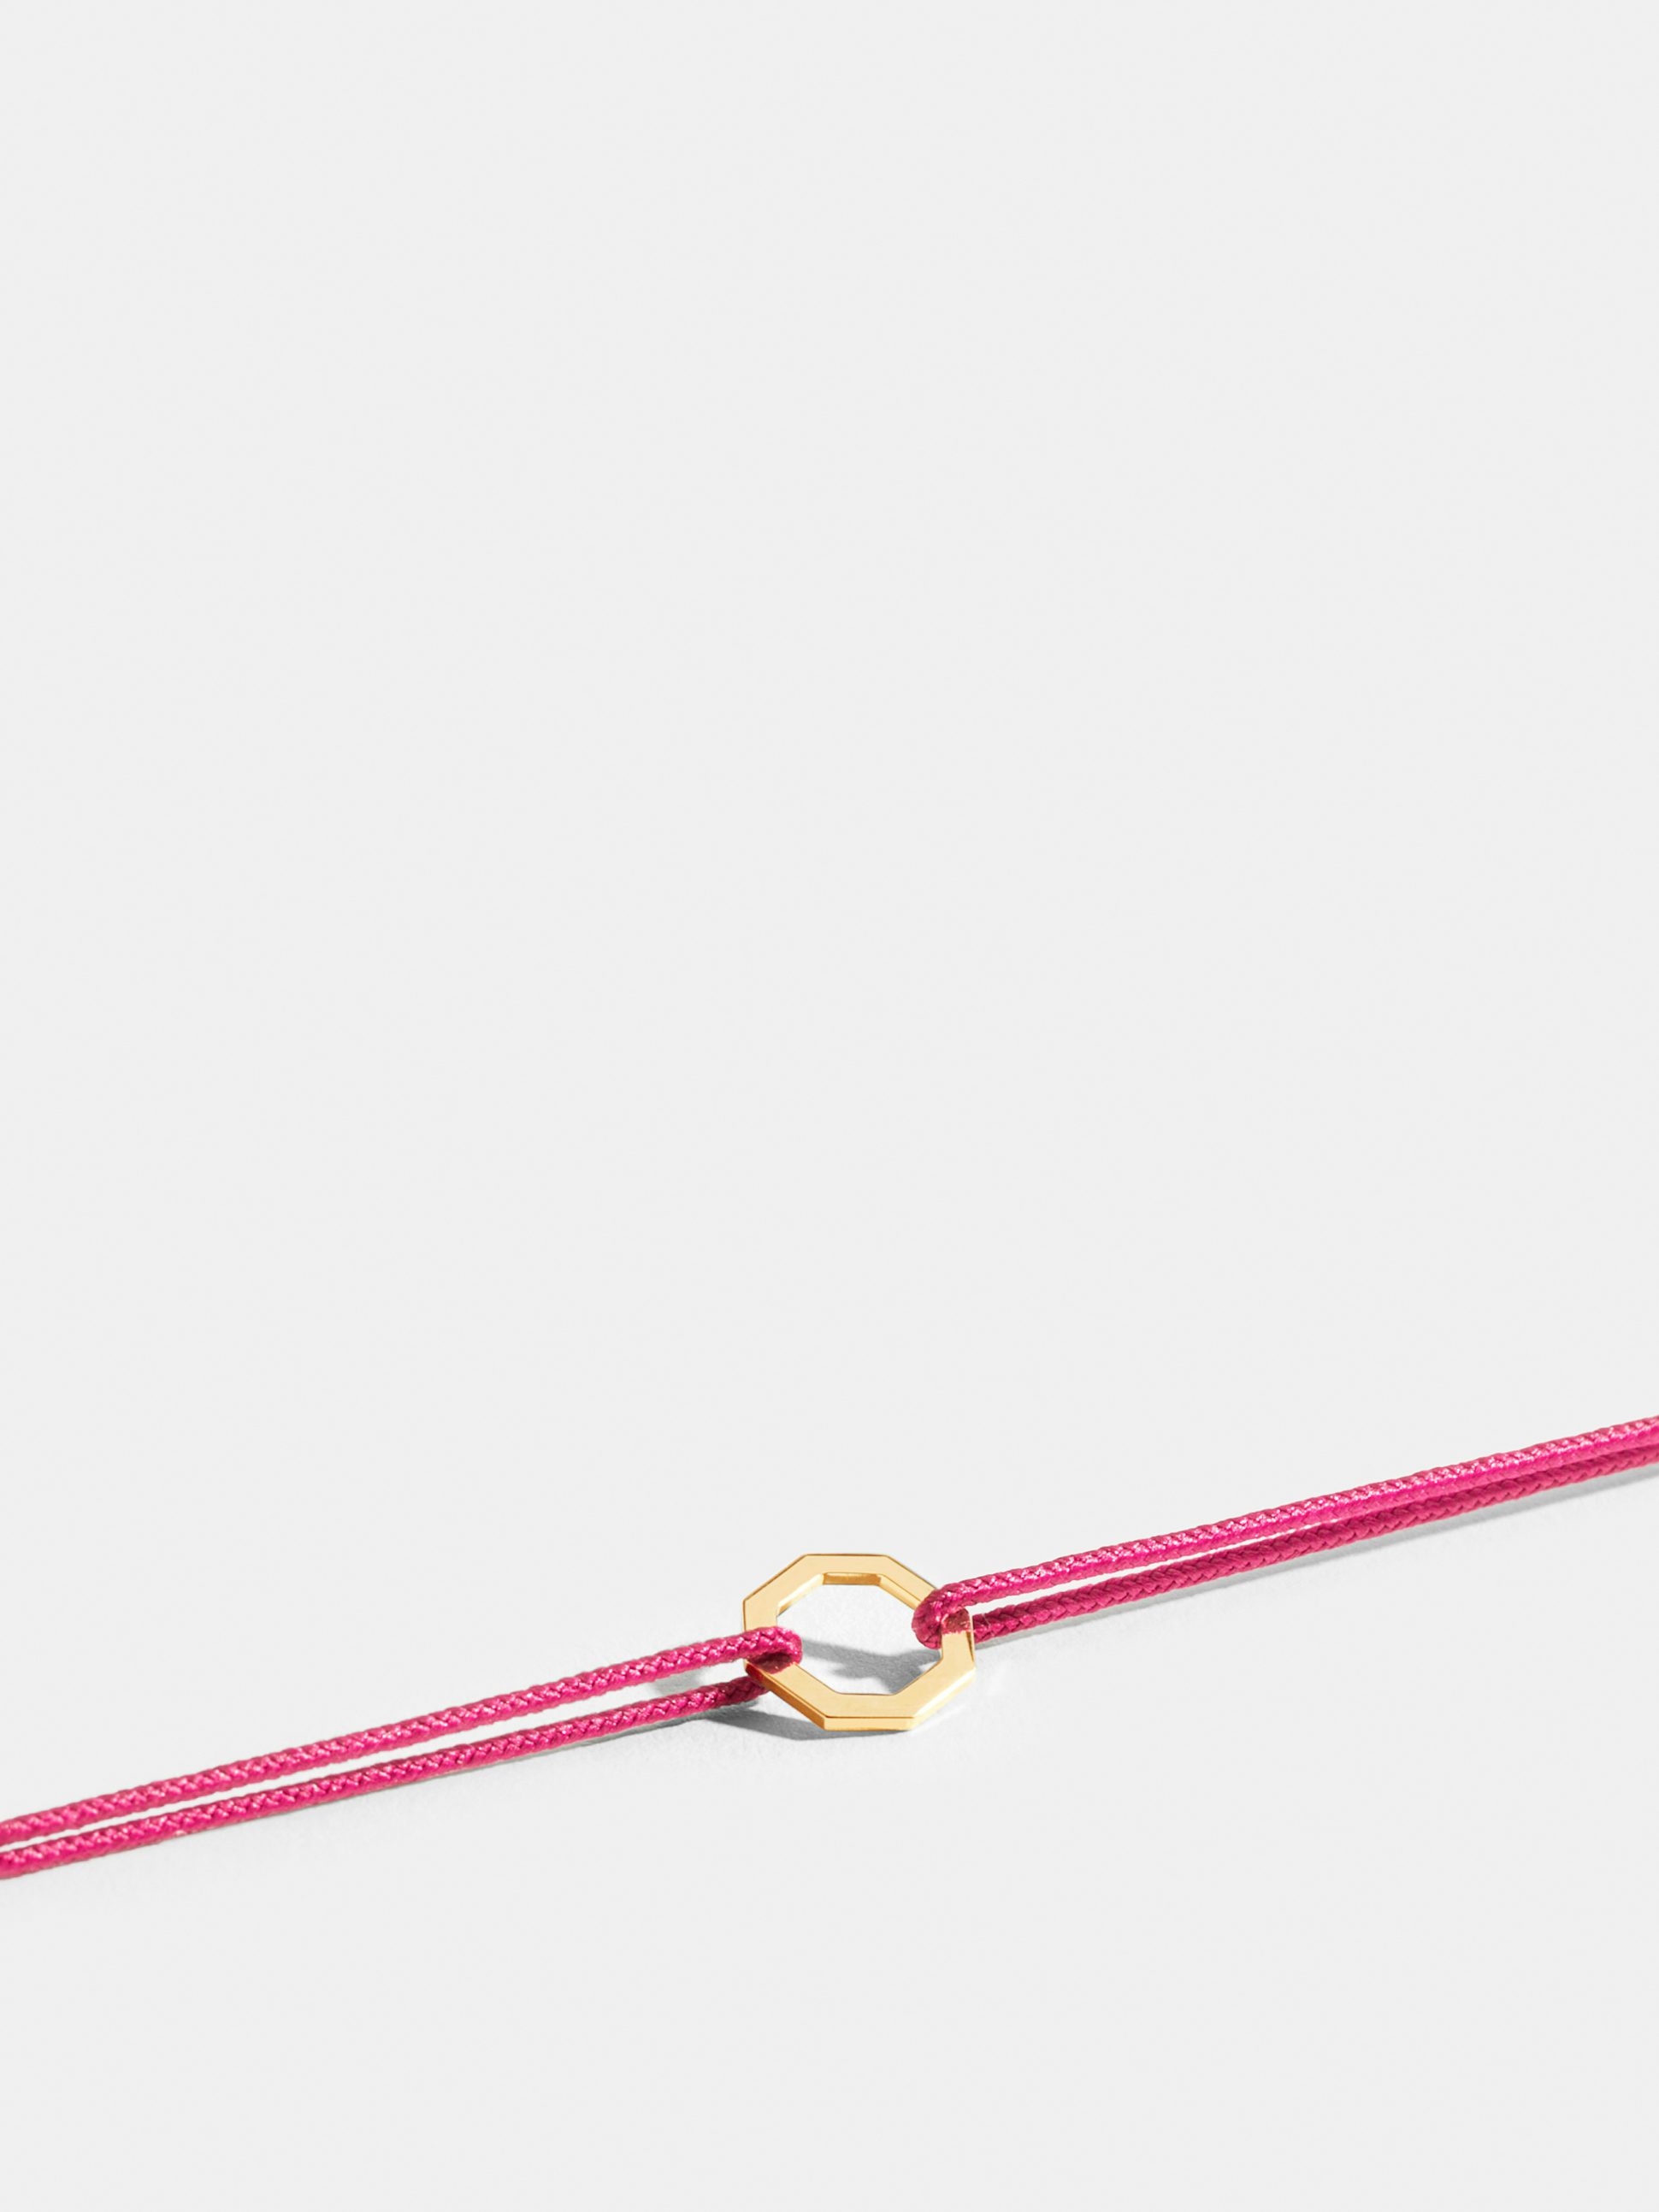 Octogone motif in 18k Fairmined ethical yellow gold, on a fuschia pink cord. 